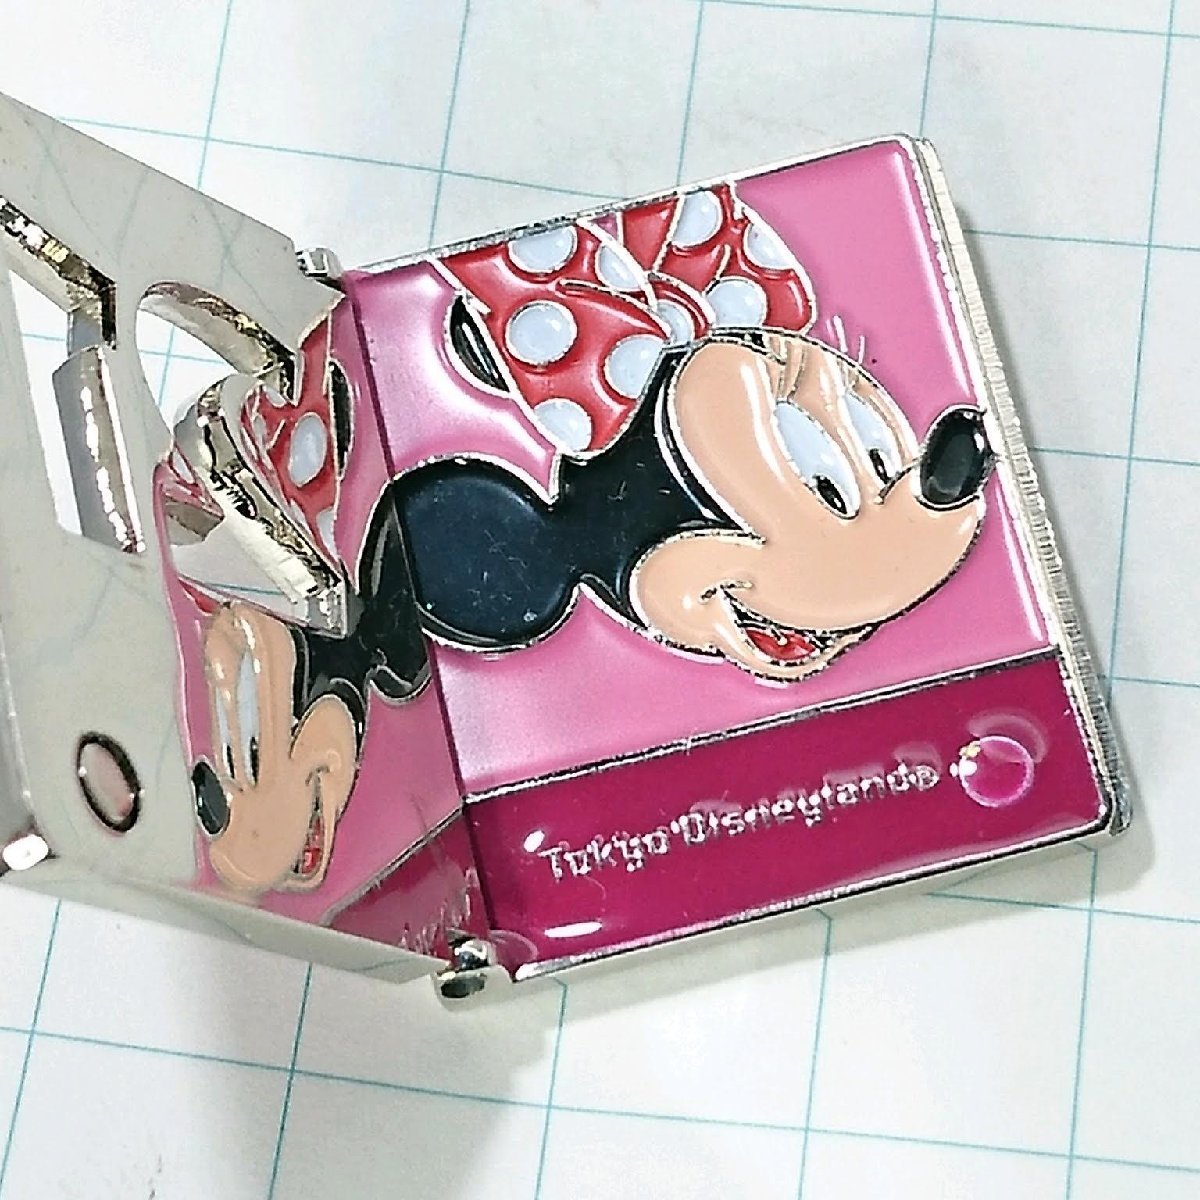  free shipping ) Minnie Mouse picture book type TDL pin badge PINS pin zA10794